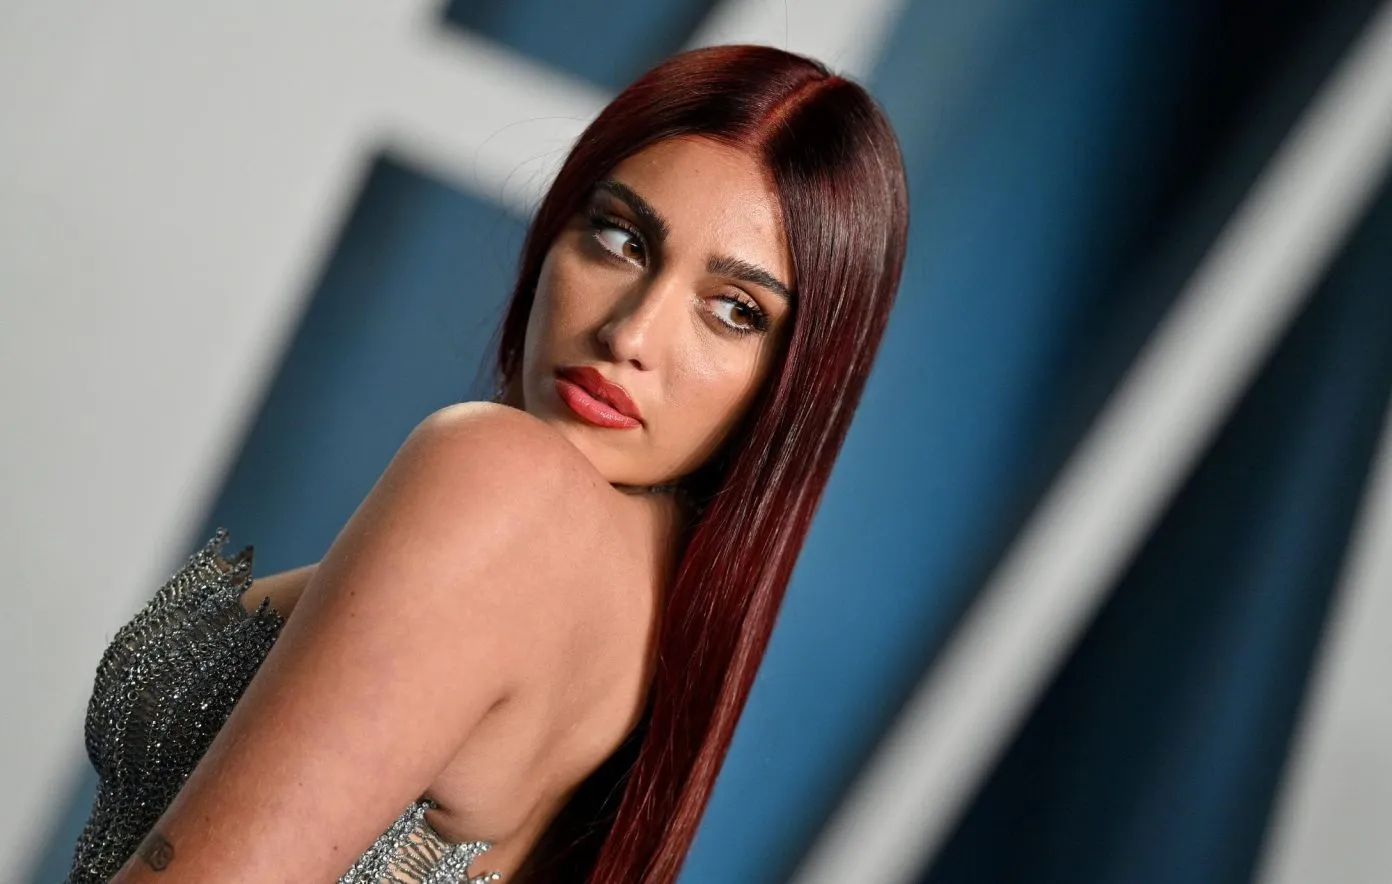 See how Lourdes Leon, Madonna's daughter, performs as Lolahol at the Madrid Festival